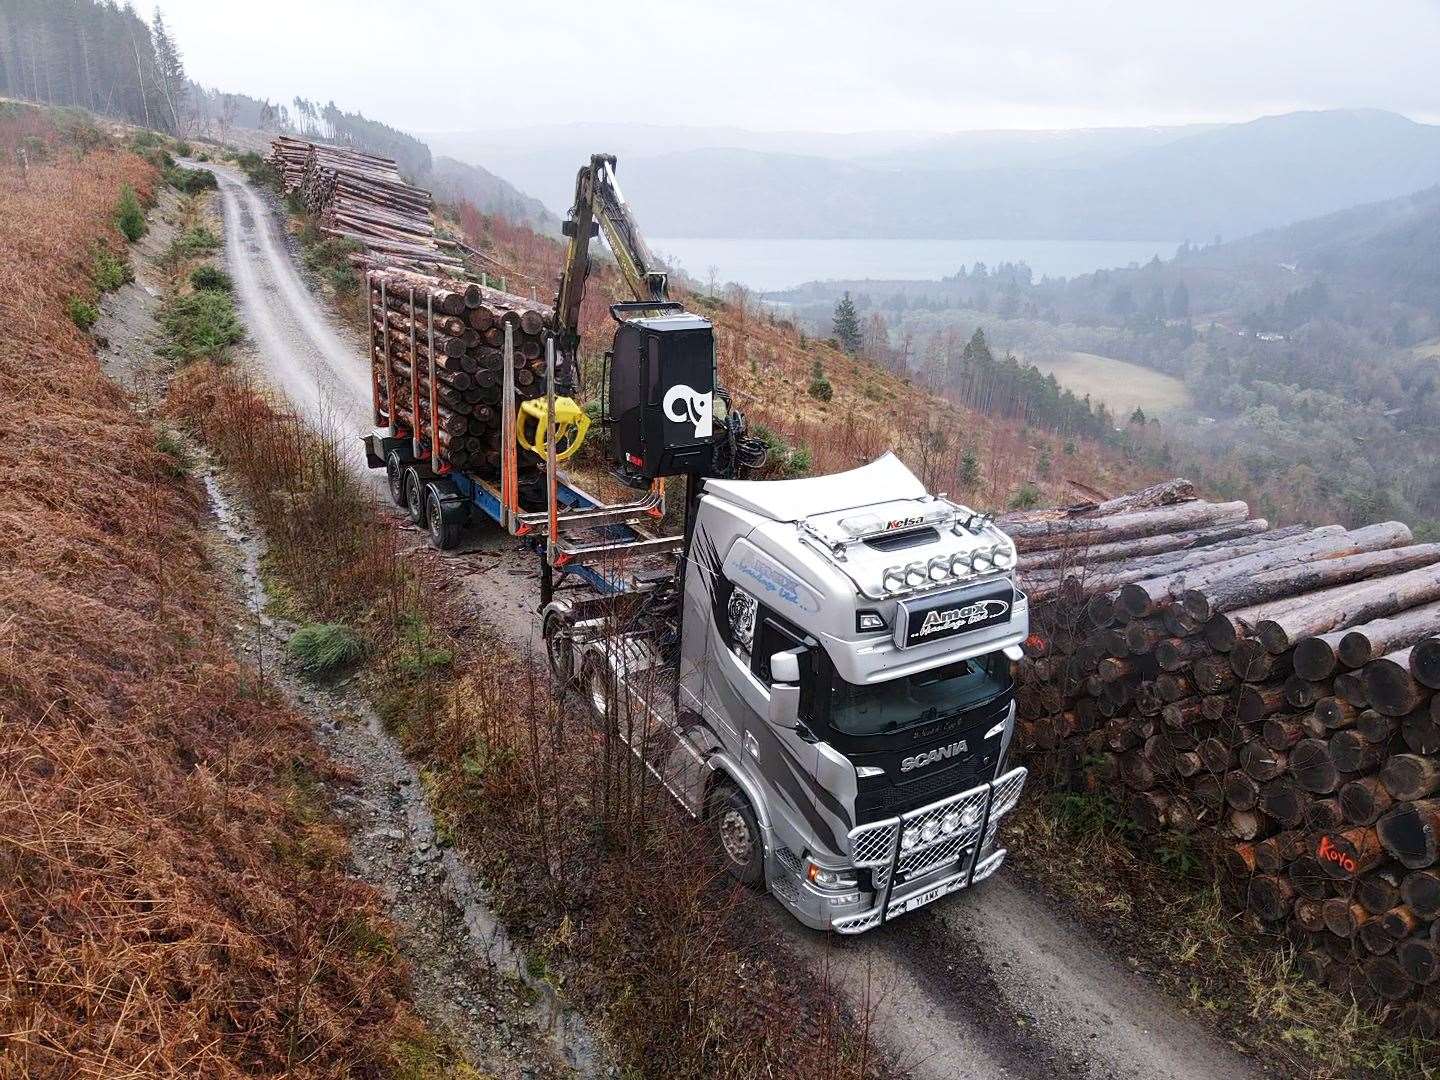 The funding from Scottish Forestry, co-financed by Highland Council, will improve roads and add passing places at three locations in the Highlands.